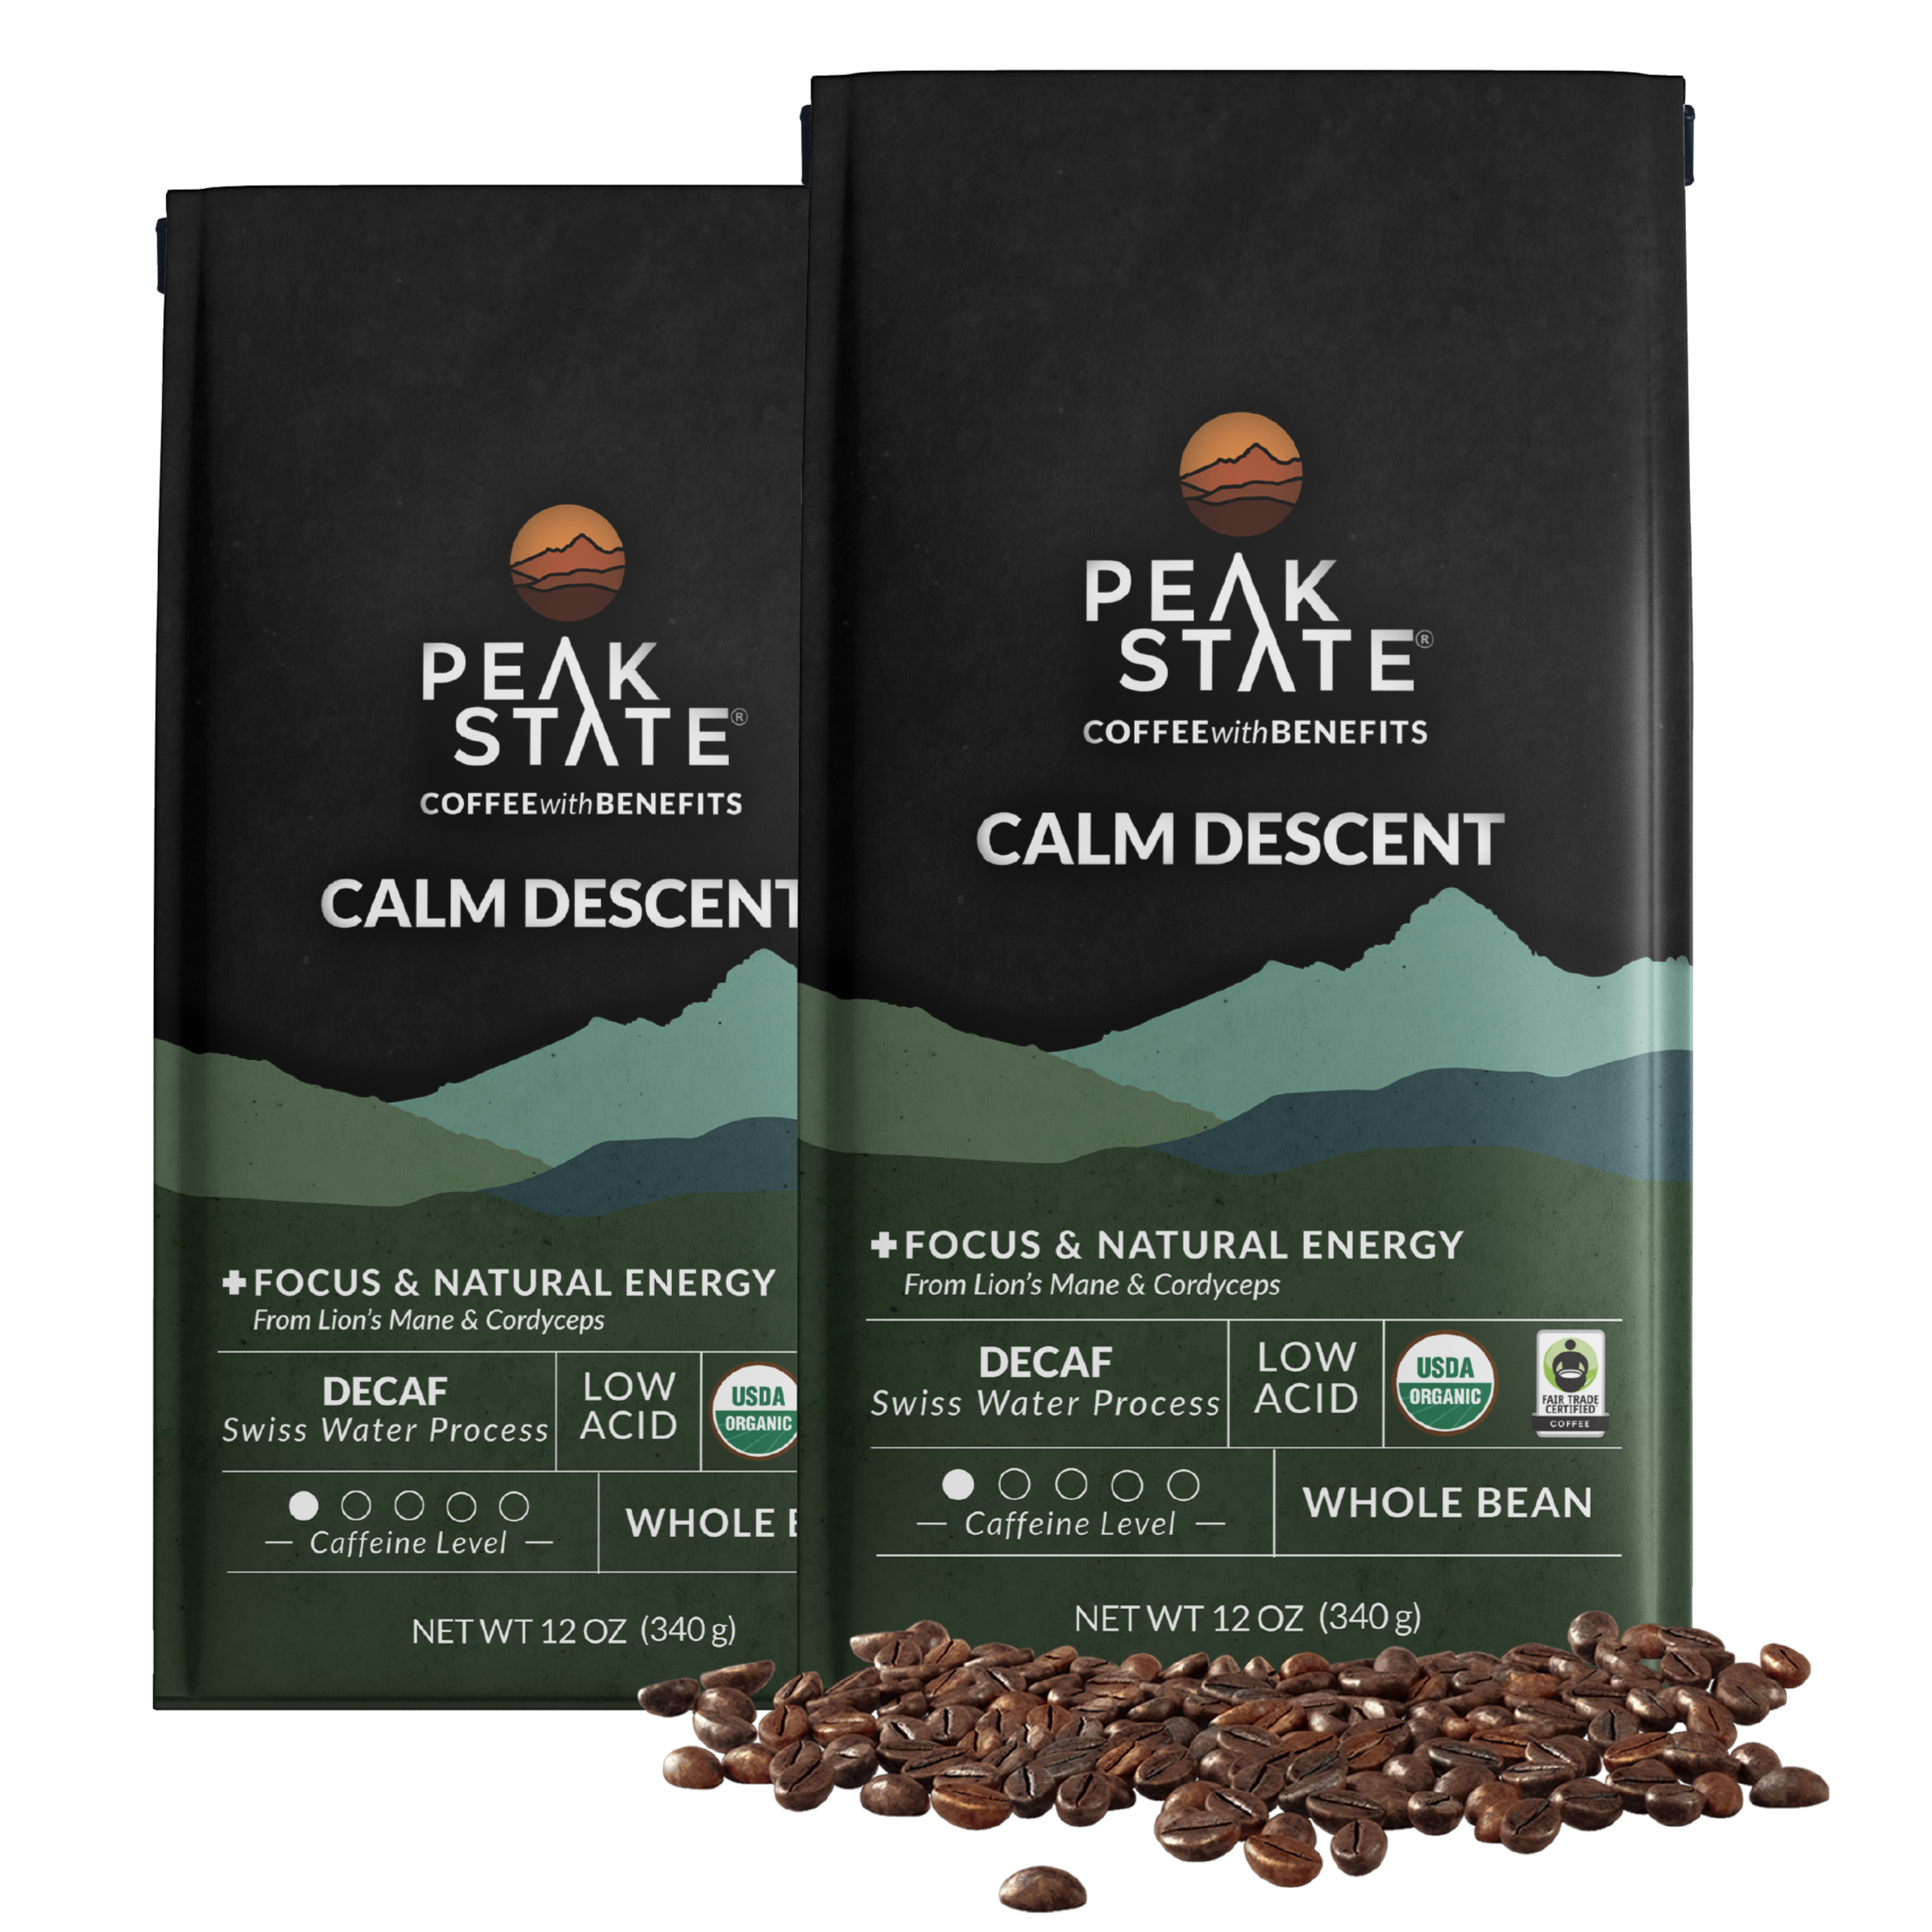 2 x 12oz bags of Peak State's Calm Descent whole bean decaf coffee.